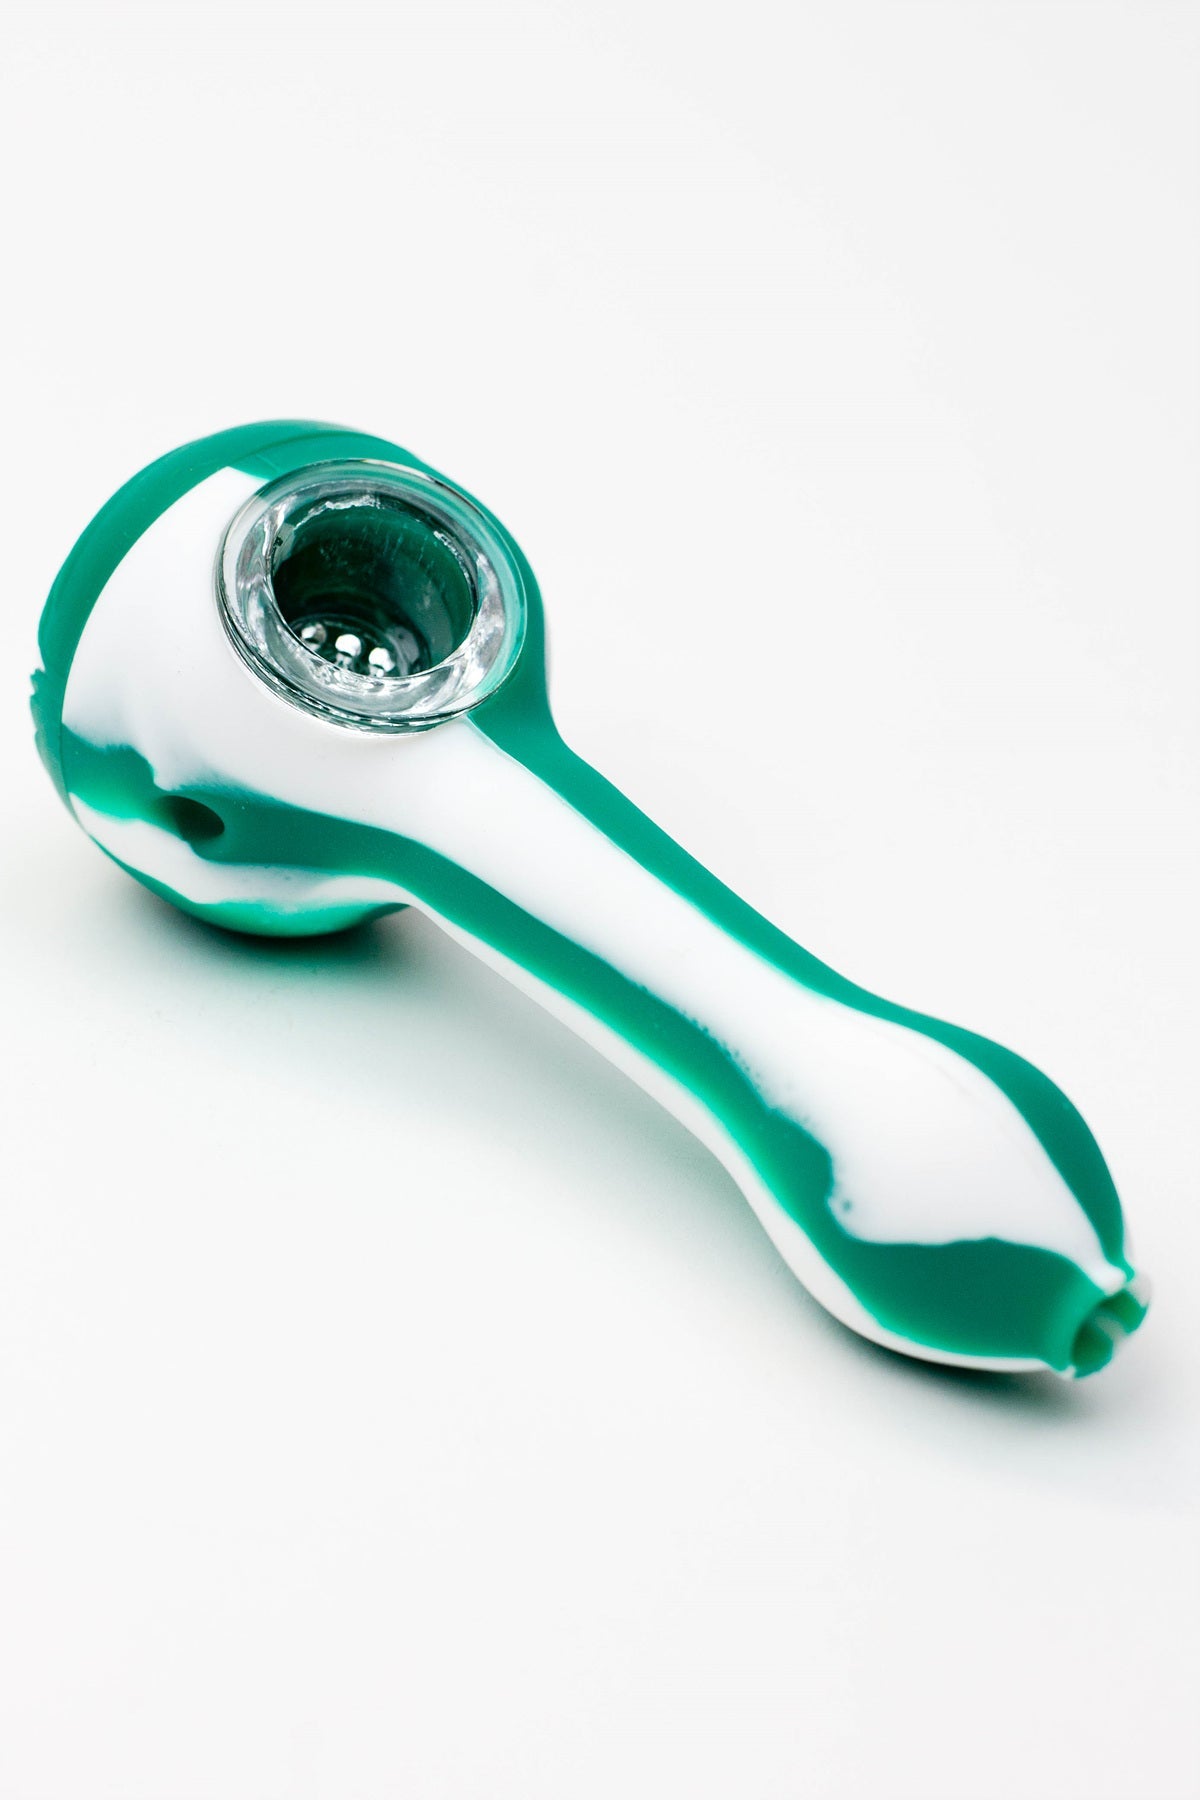 EYE Silicone hand pipe with glass bowl